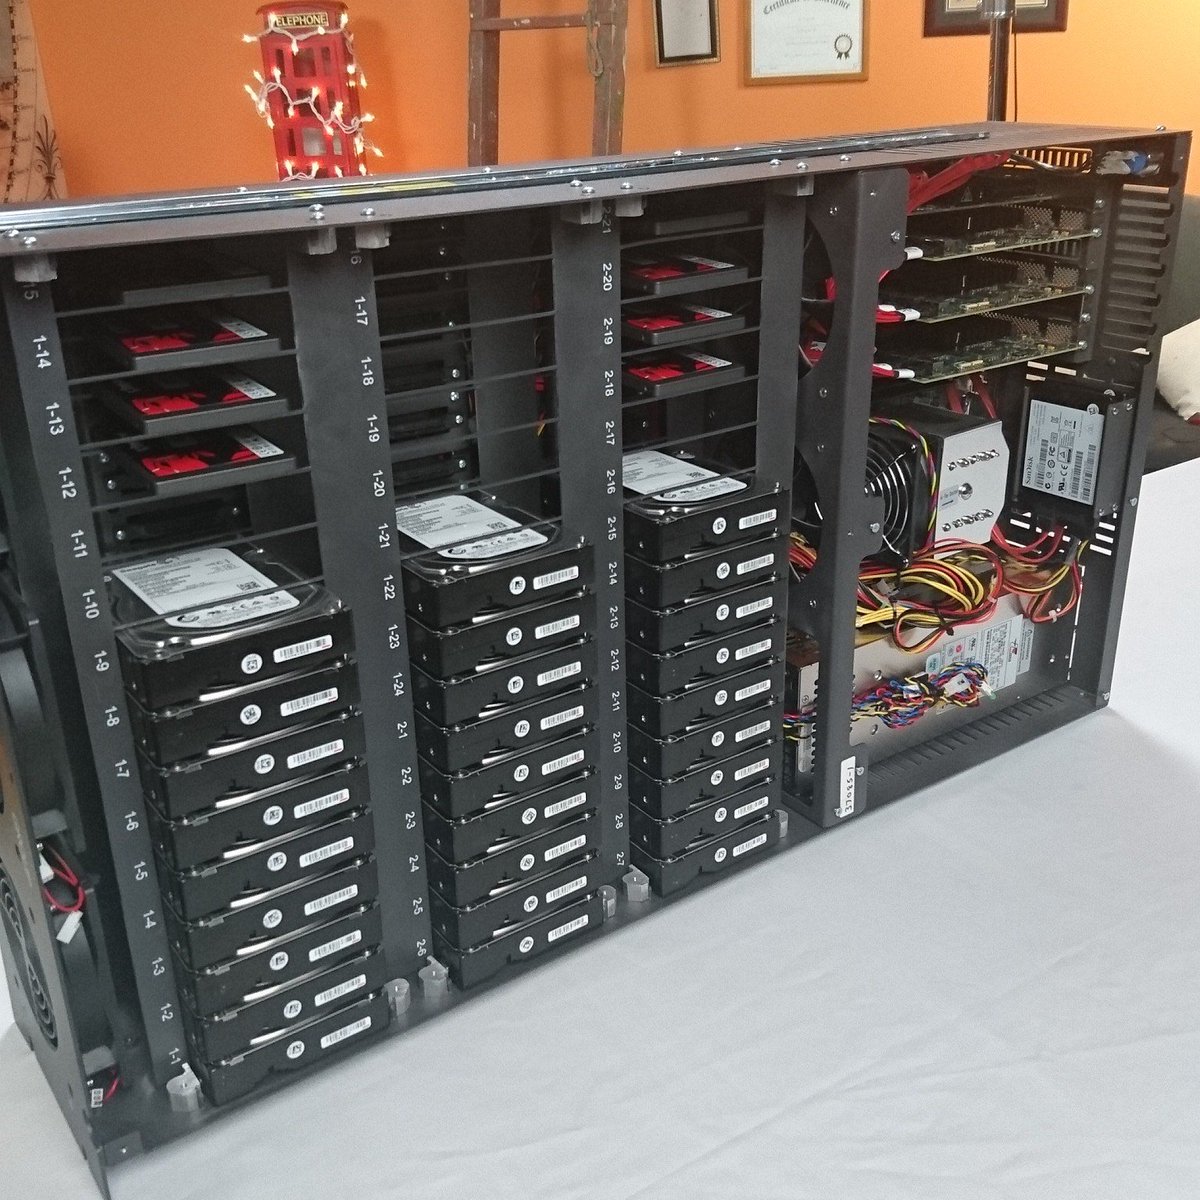 Linus Tech Tips Twitterissä: "Here's a better look at the and (now with SSD cache) Vault @kingstontech @Seagate https://t.co/BFlfzcdcsG" Twitter